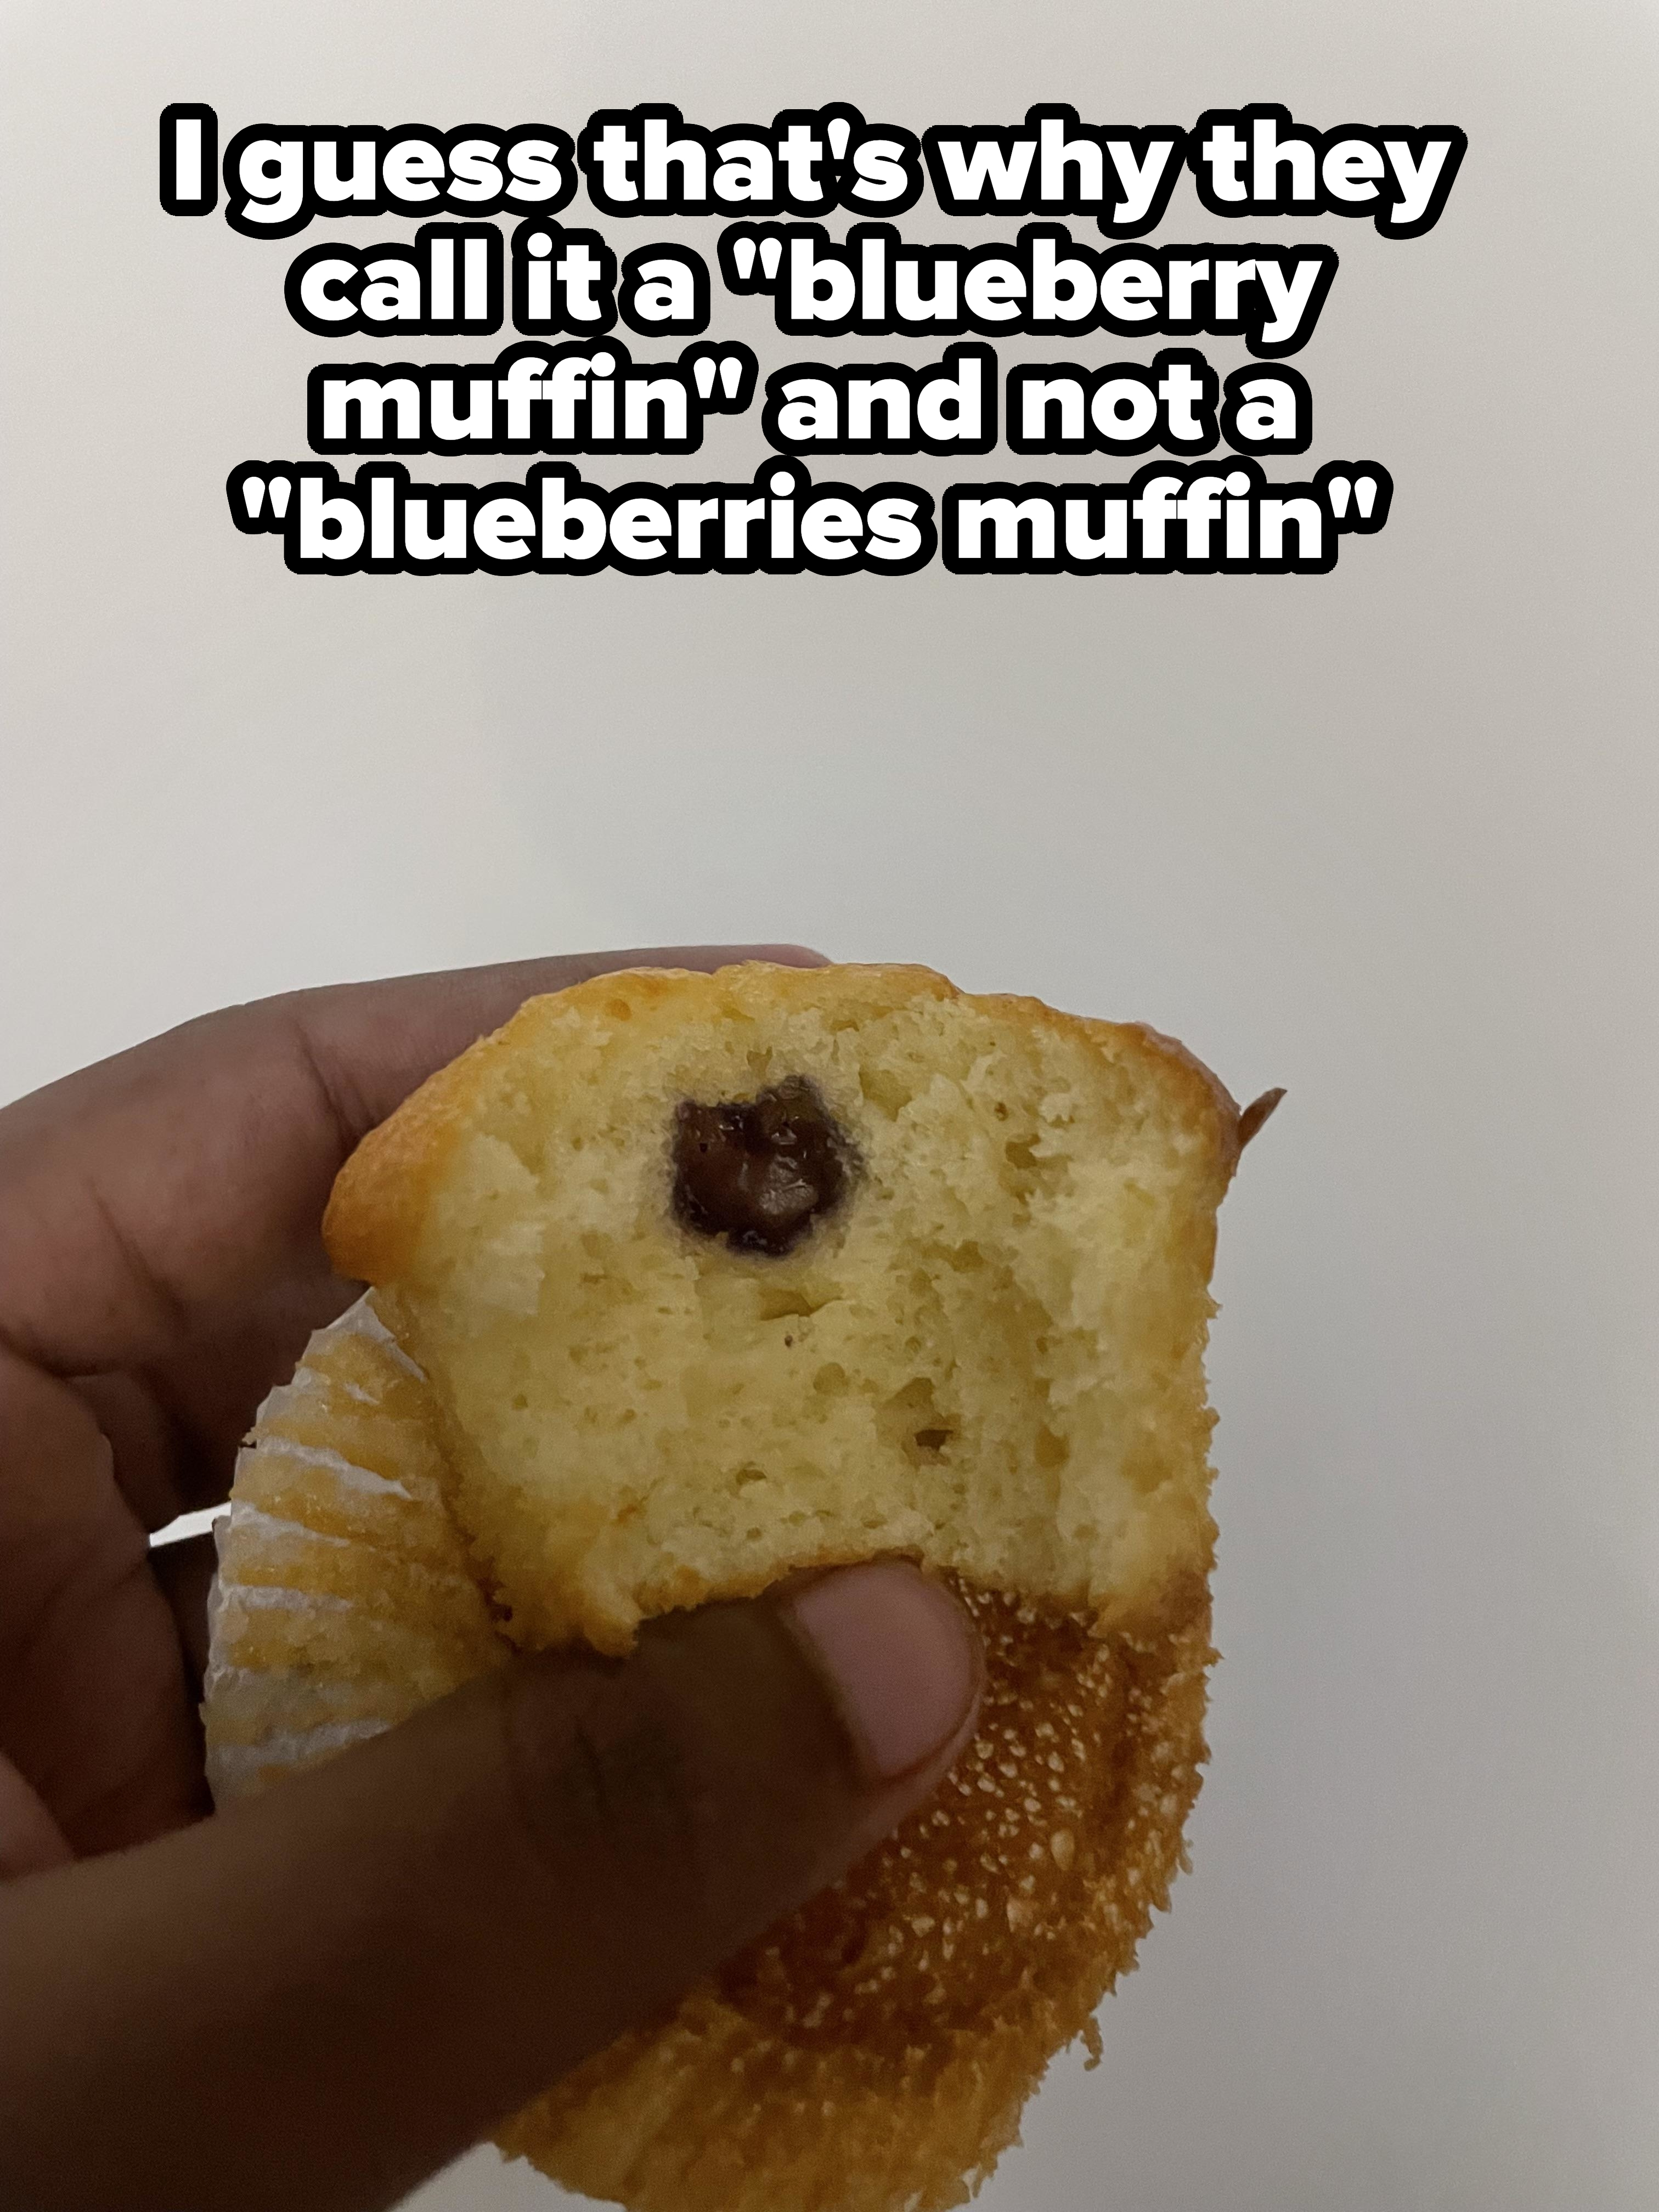 Hand holding a half-eaten muffin with a single blueberry inside, with caption, &quot;I guess that&#x27;s why they call it a blueberry muffin and not a blueberries muffin&quot;